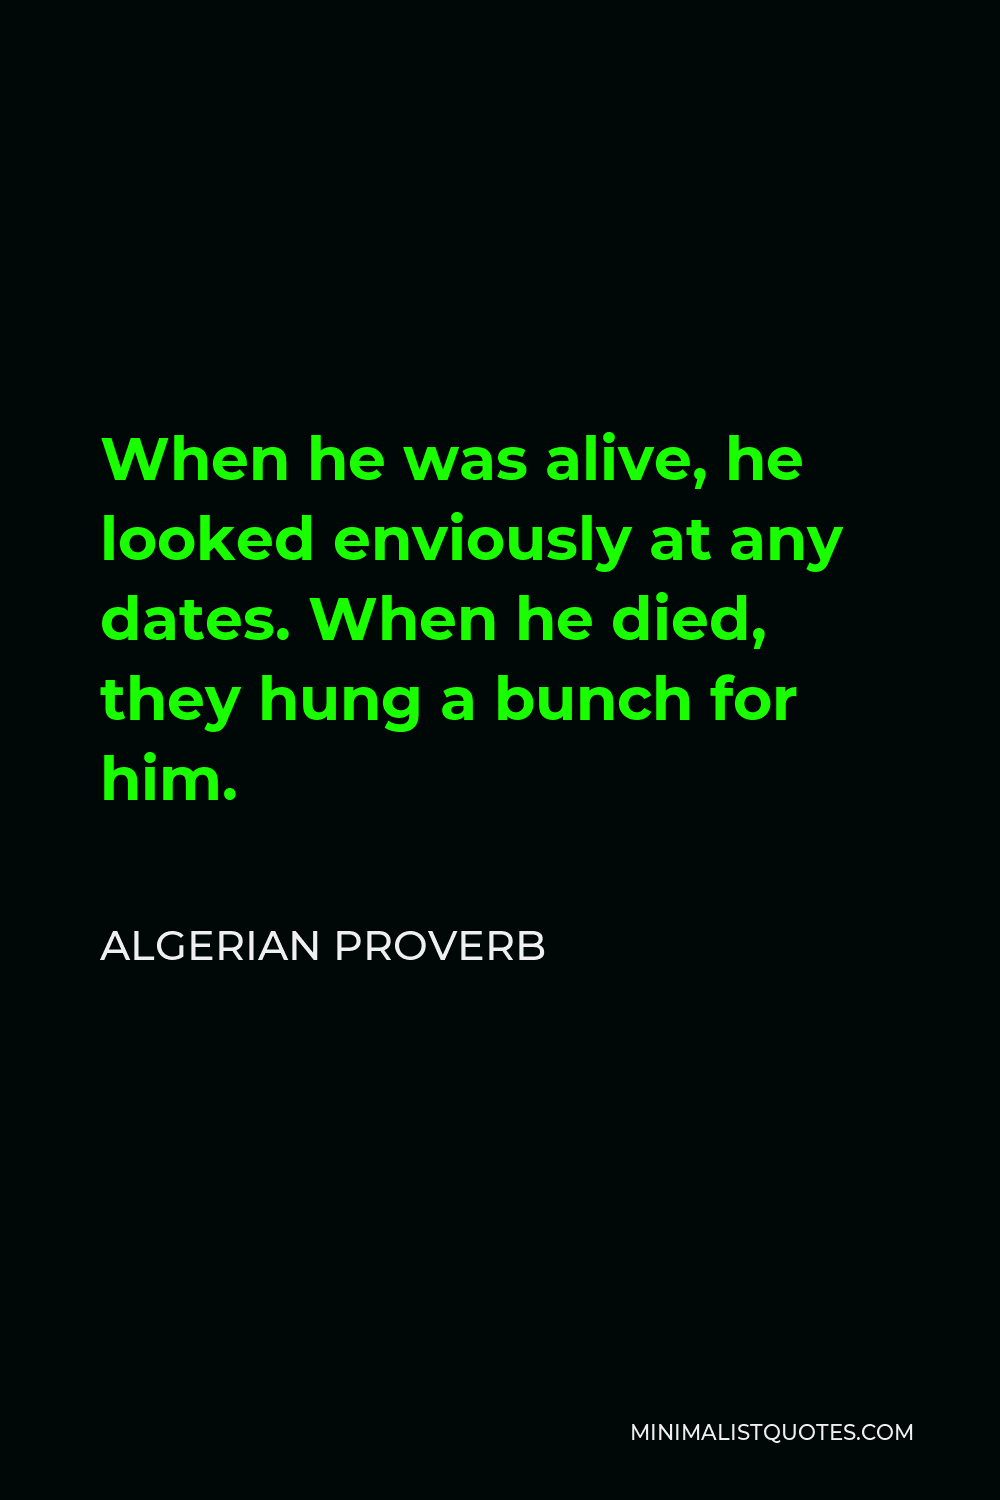 Algerian Proverb Quote - When he was alive, he looked enviously at any dates. When he died, they hung a bunch for him.